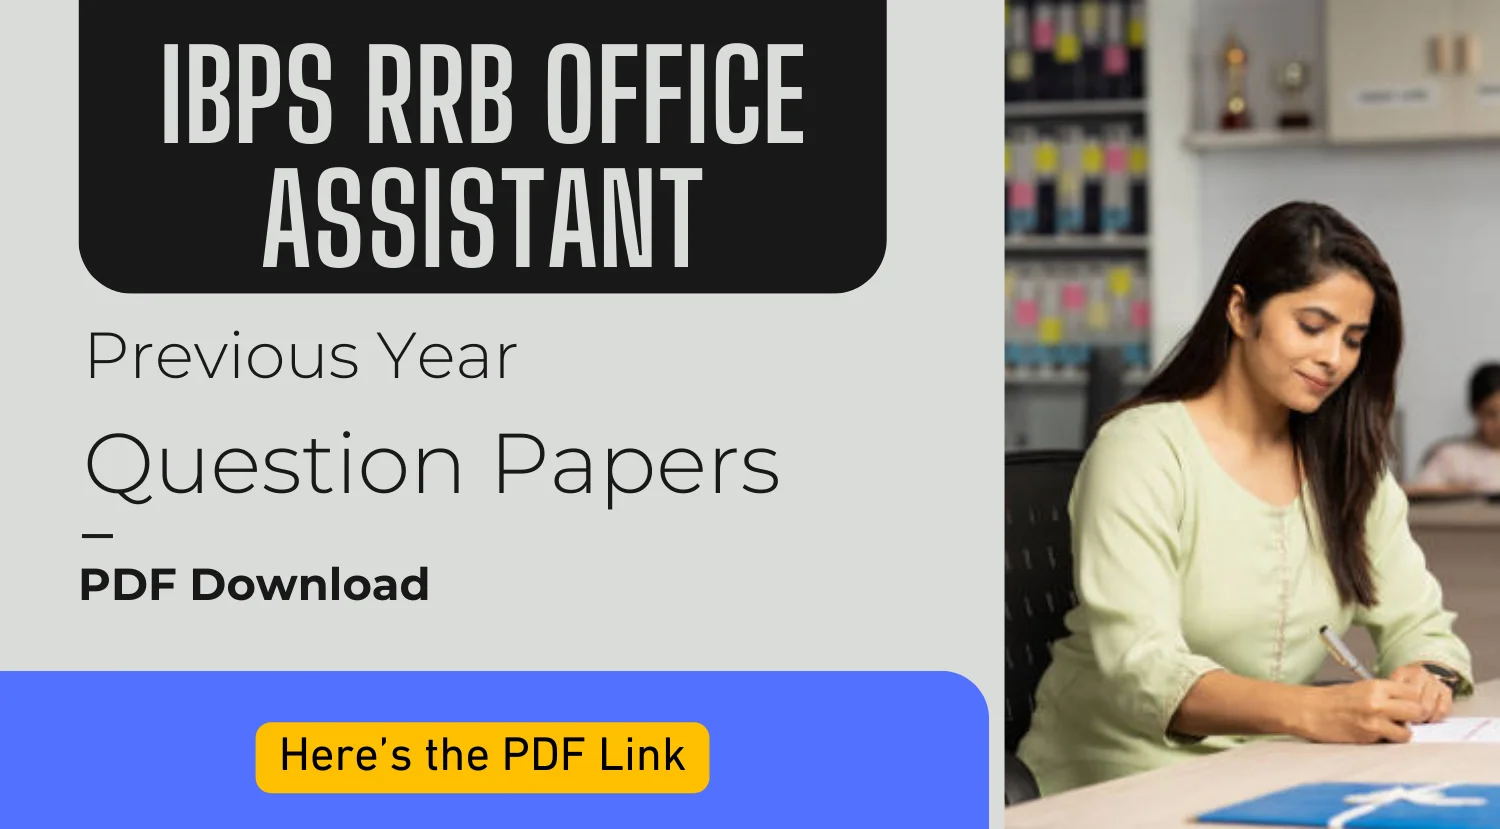 IBPS RRB Office Assistant Previous Year Question Papers PDF Download